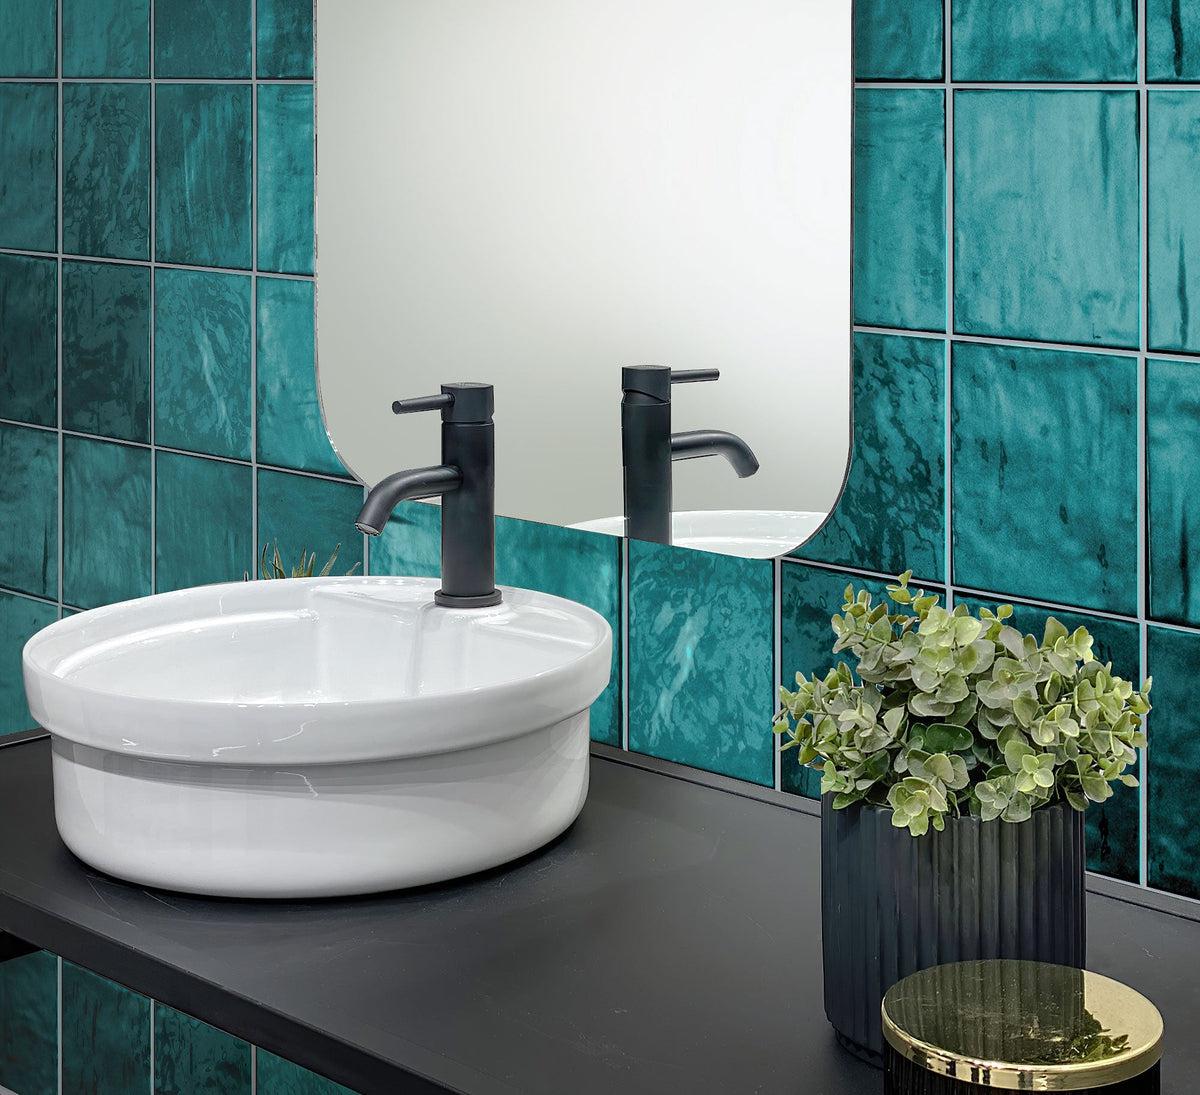 Round White Ceramic Sink with Black Faucet on La Riviera Quetzal Ceramic Tile Wall Background